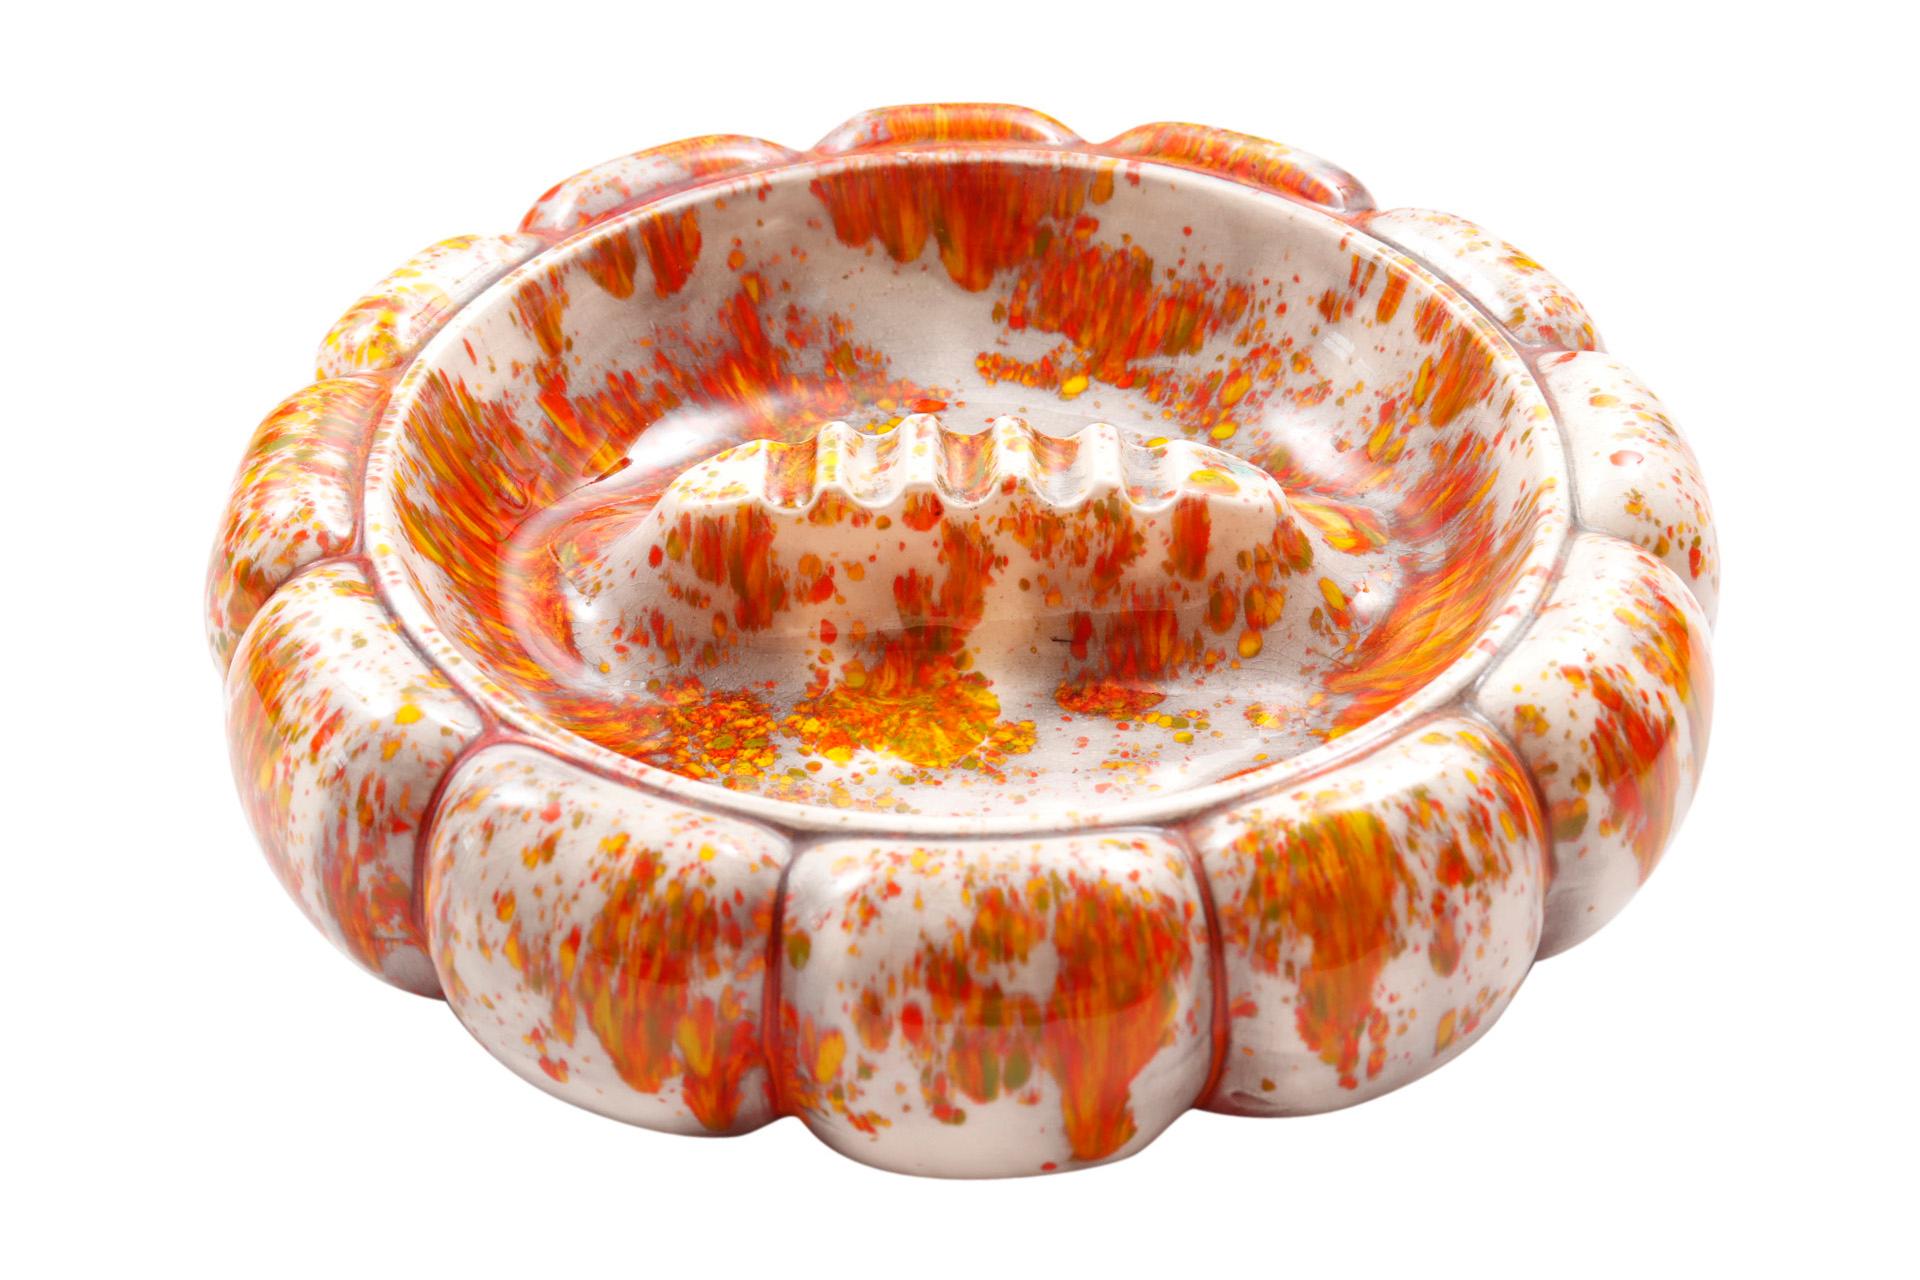 A pair of large round ceramic ashtrays glazed in bright red, orange and white. Bubble shaped edges give the look of gourds. At the center is a raised cigarette rest. Mold mark reads Arnels. Hand inscribed underneath Liz 76 and Liz 77. Dimensions per